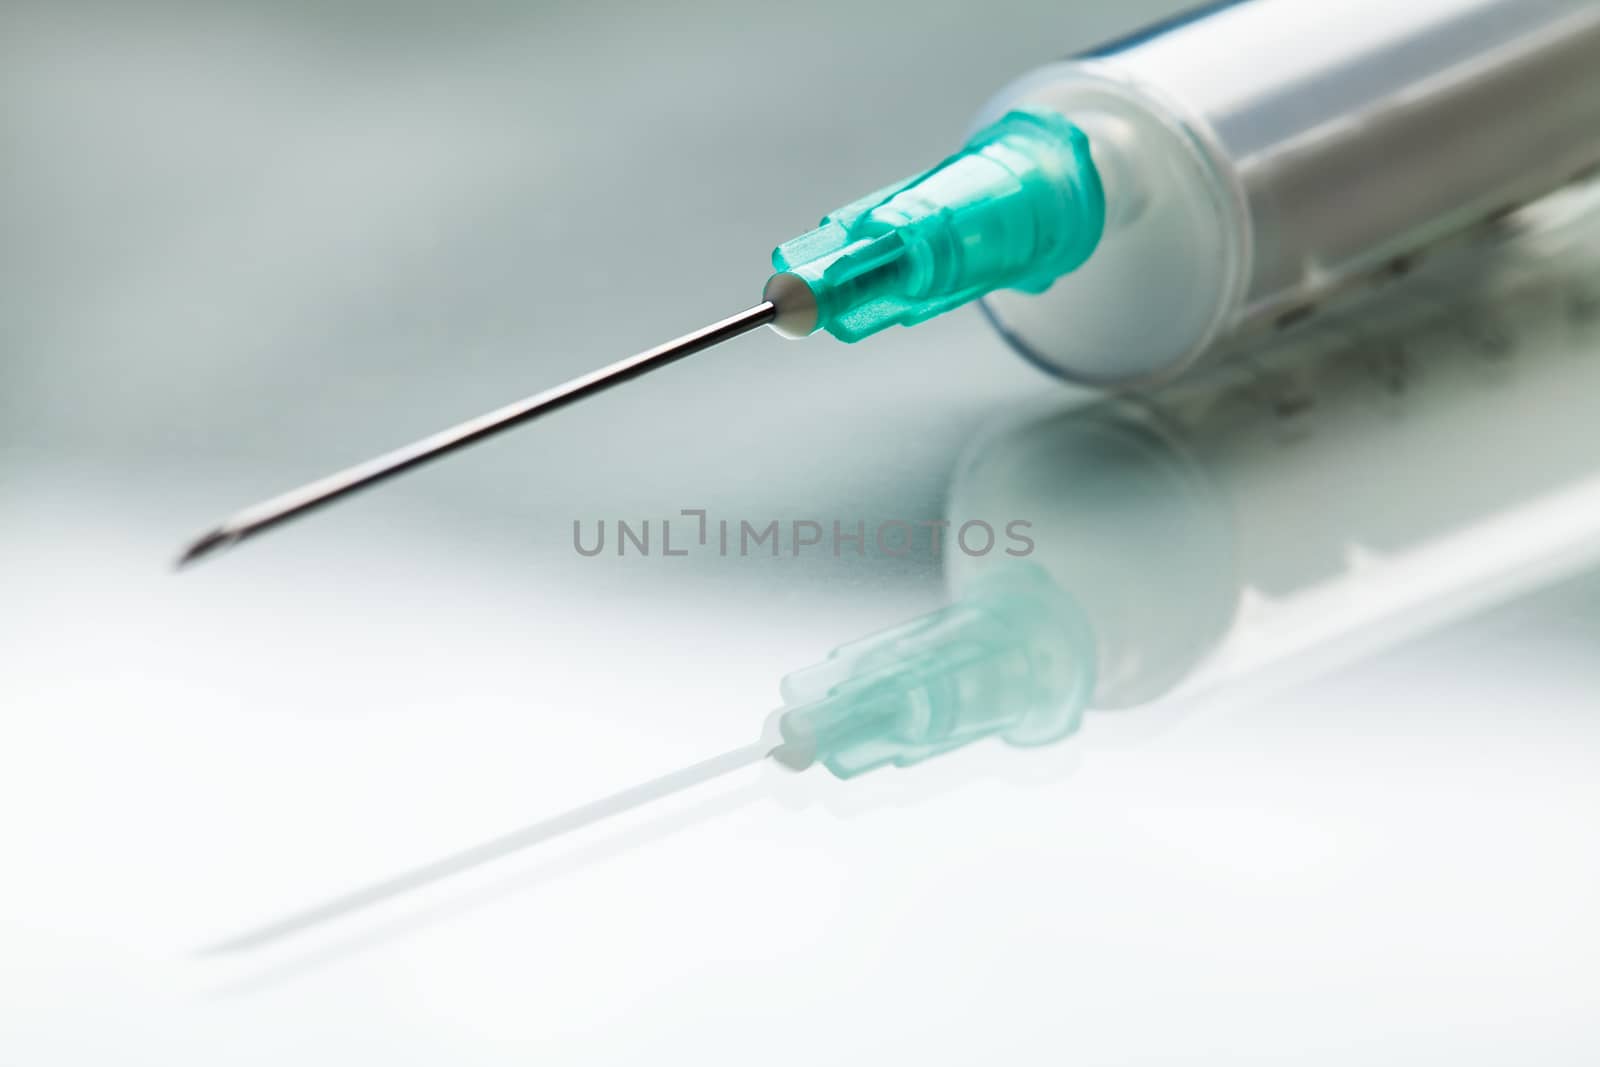 Injection shot, needle & syringe jab on reflective surface,COVID-19 Coronavirus pandemic search for potential vaccine cure,vaccination concept illustration